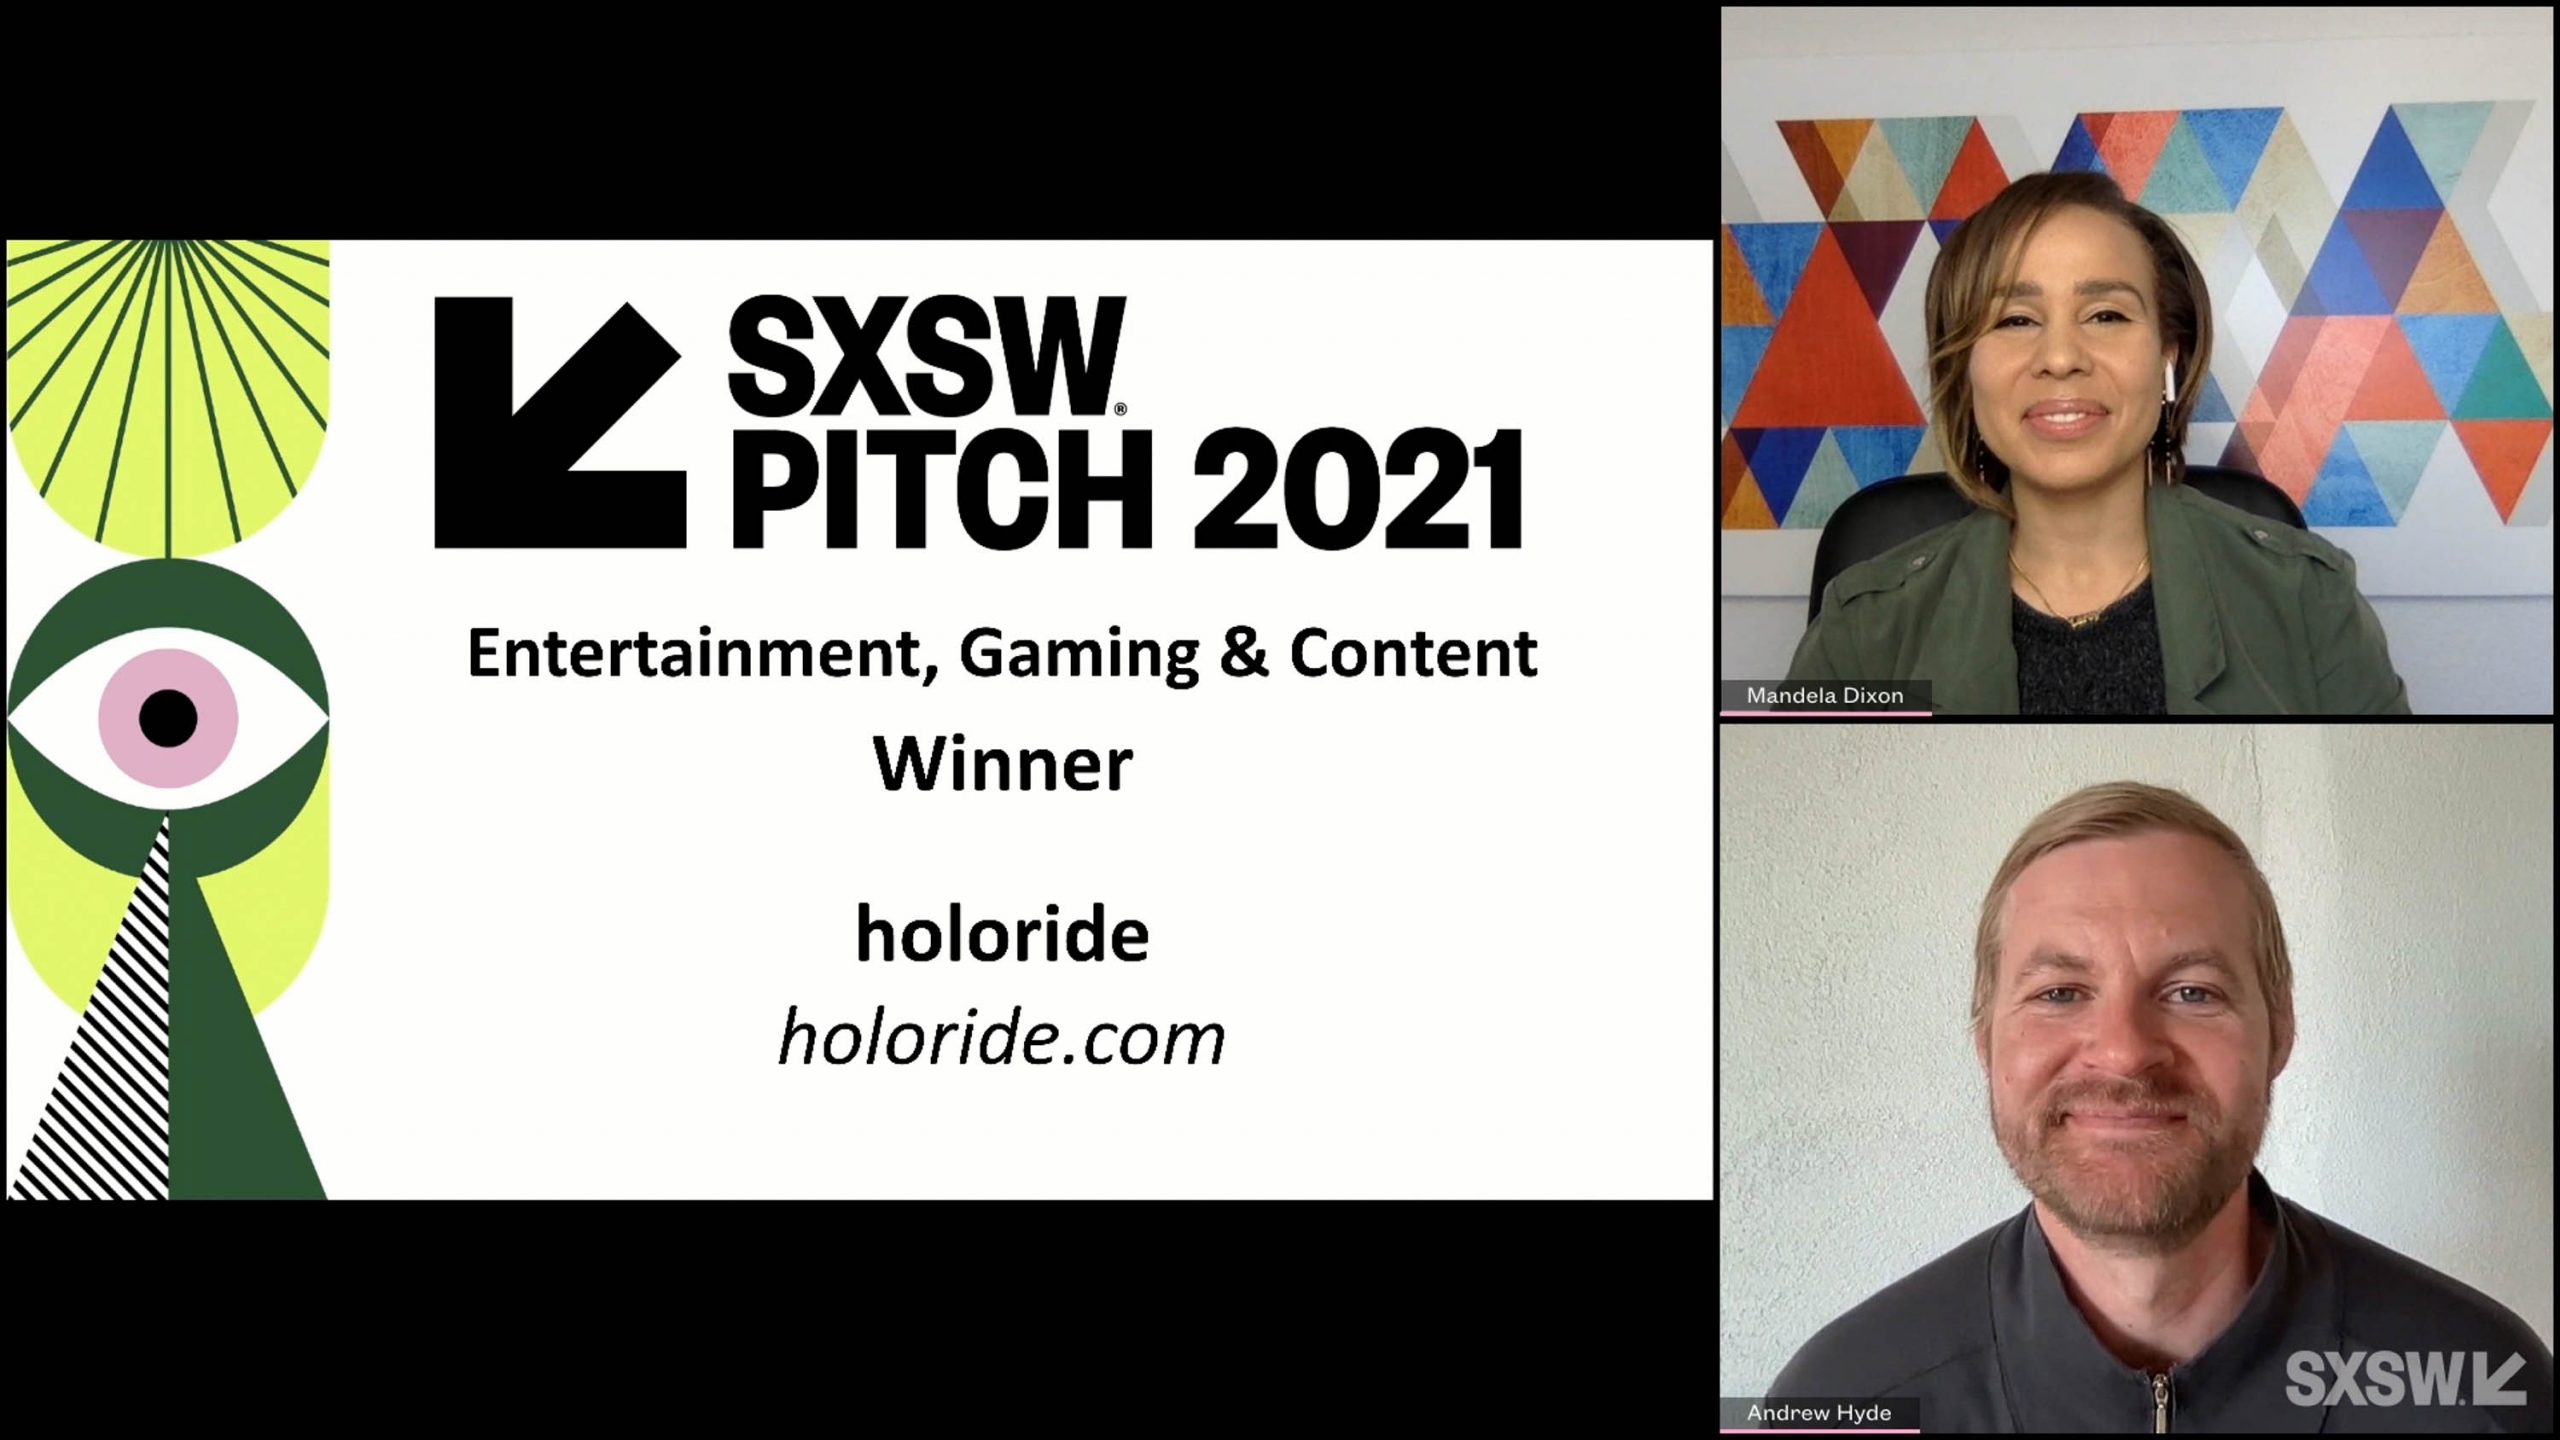 SXSW Pitch participant holoride wins the Entertainment, Gaming & Content category at the SXSW Pitch Awards during SXSW Online on March 20, 2021.